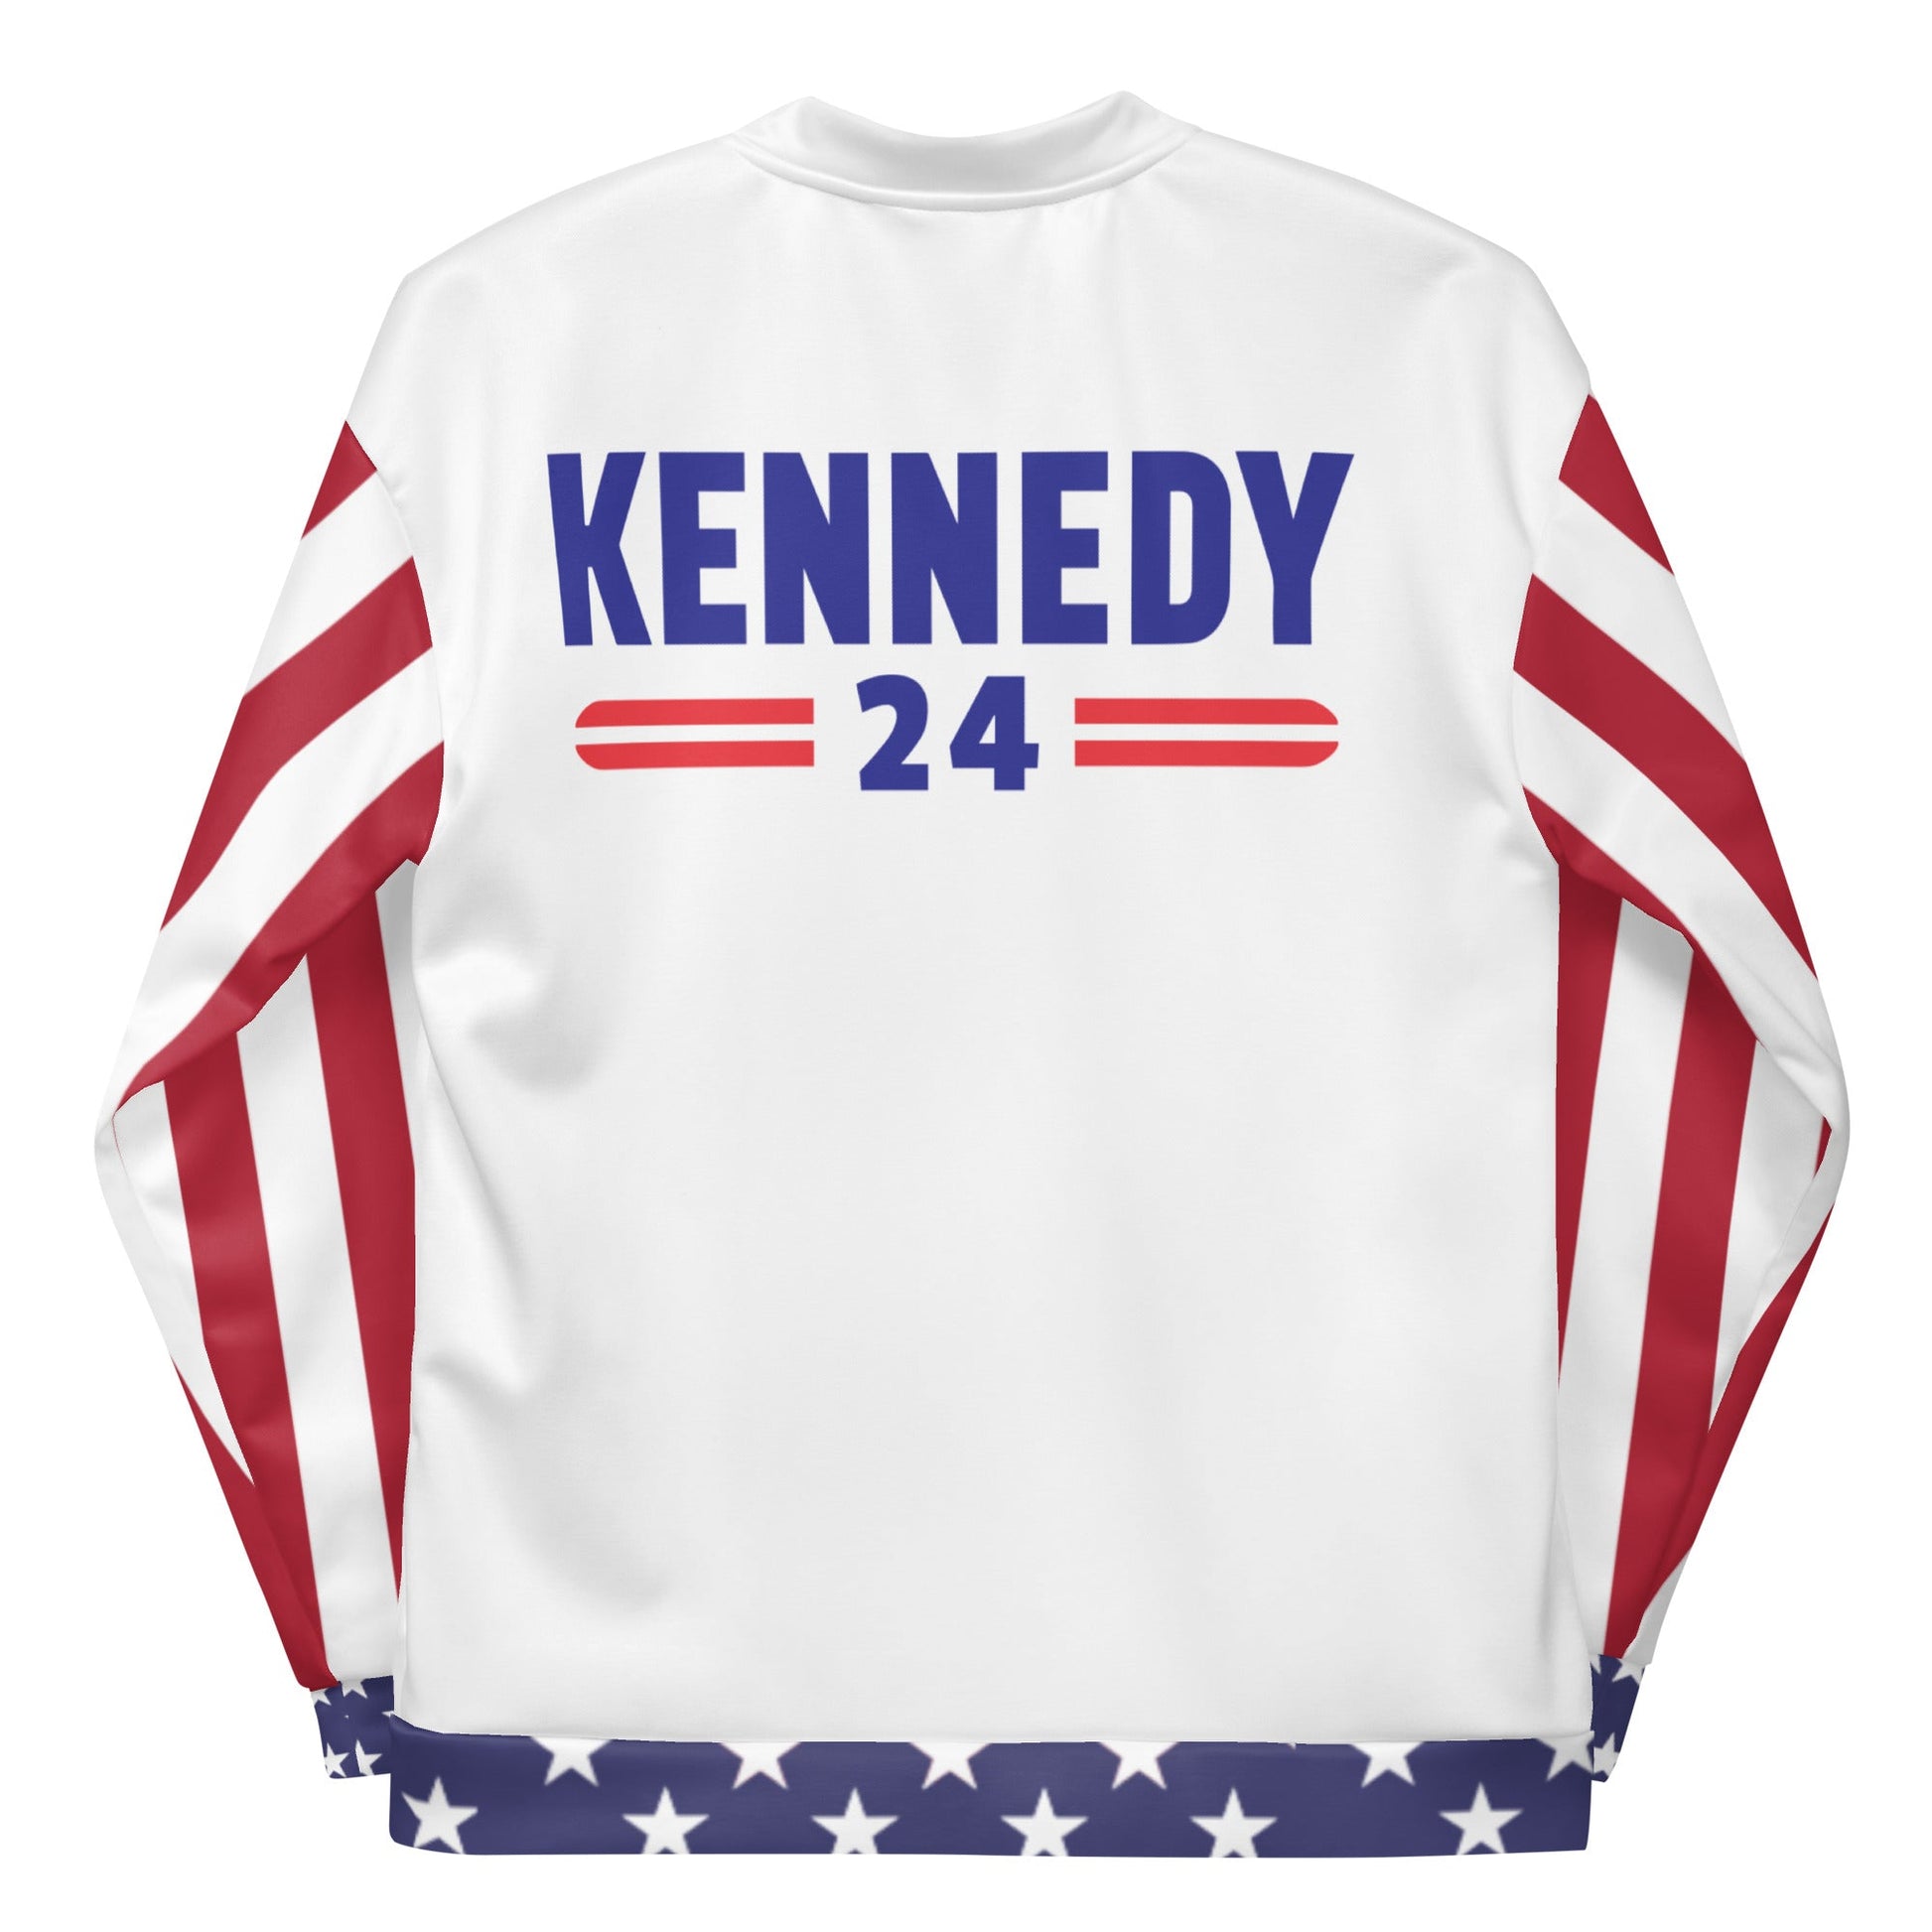 Kennedy Patriot Track Jacket - TEAM KENNEDY. All rights reserved